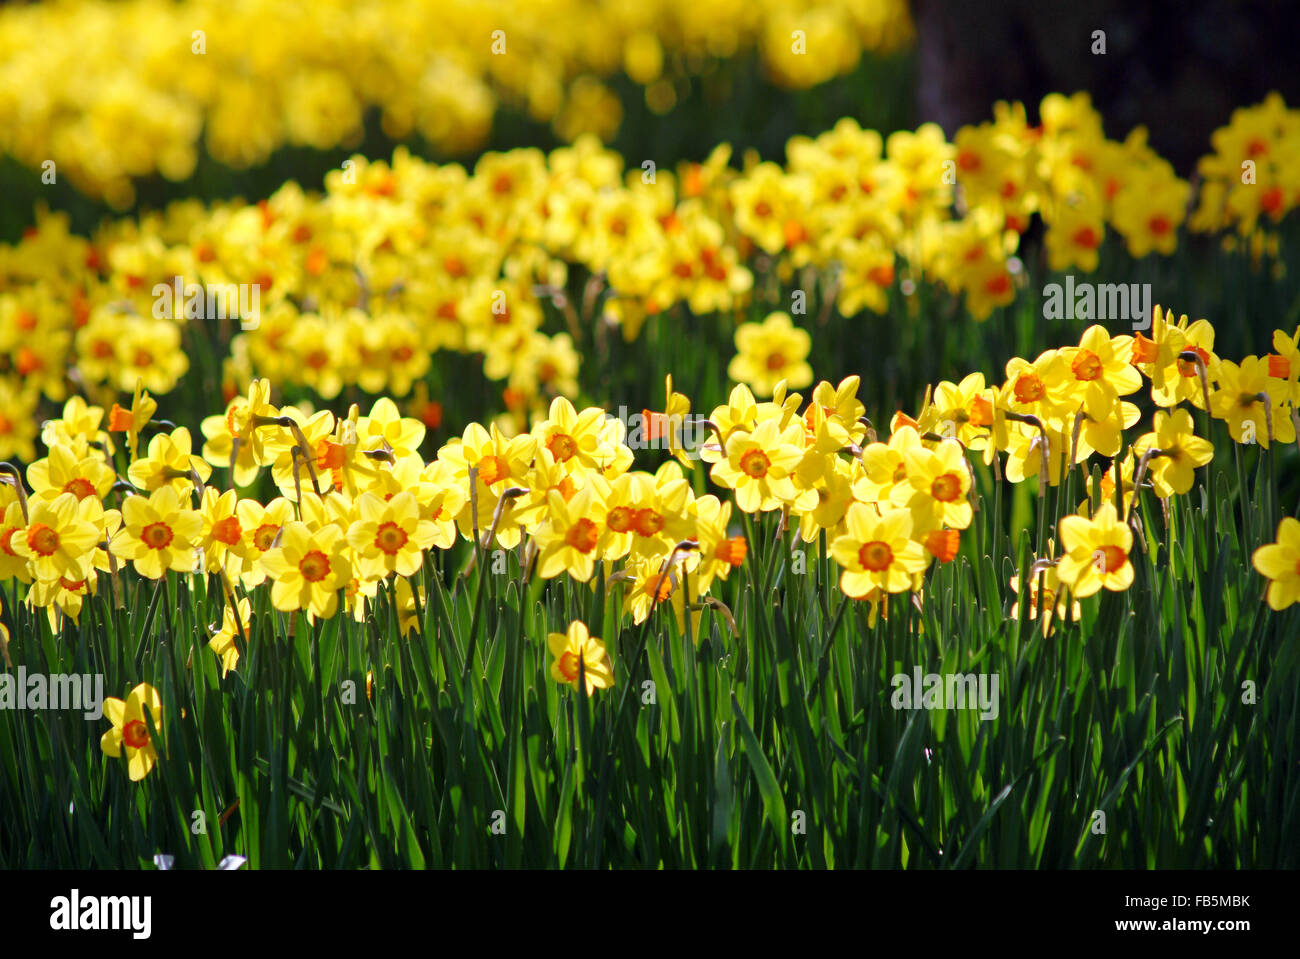 Narcissus field Stock Photo